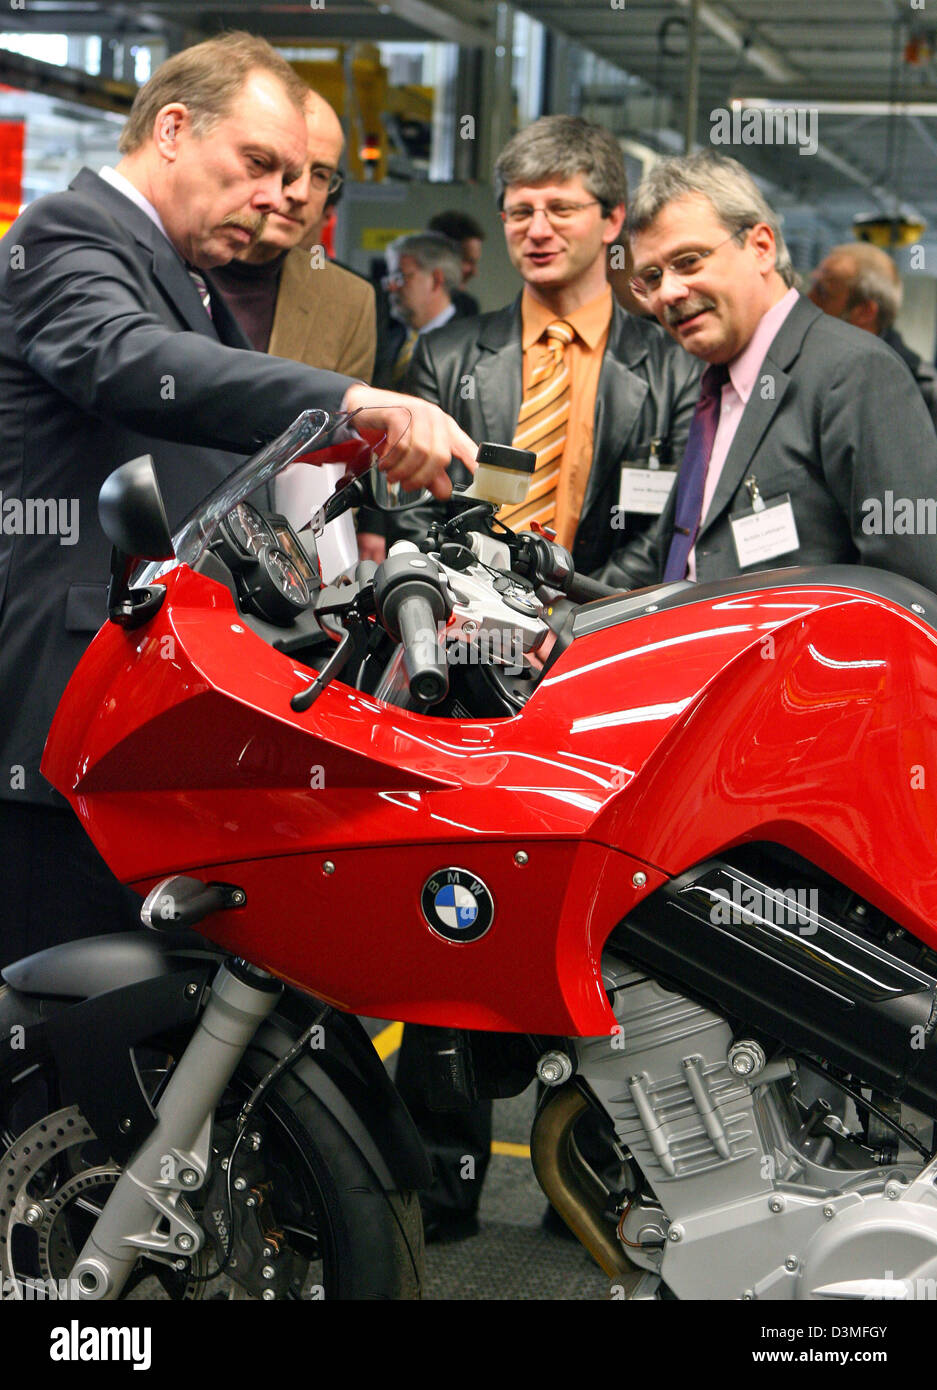 Guests admire a new F800S motorbike during a festivity on the occasion of the inauguration of the production of a new BMW motorbike line in Berlin, Thursday 02 March 2006. Last year BMW launched a marketing campaign aiming at mainly younger consumer. With the sports motorbike BMW presents a completely new two cylindre series and prepares for its entry into highly contested  middle  Stock Photo